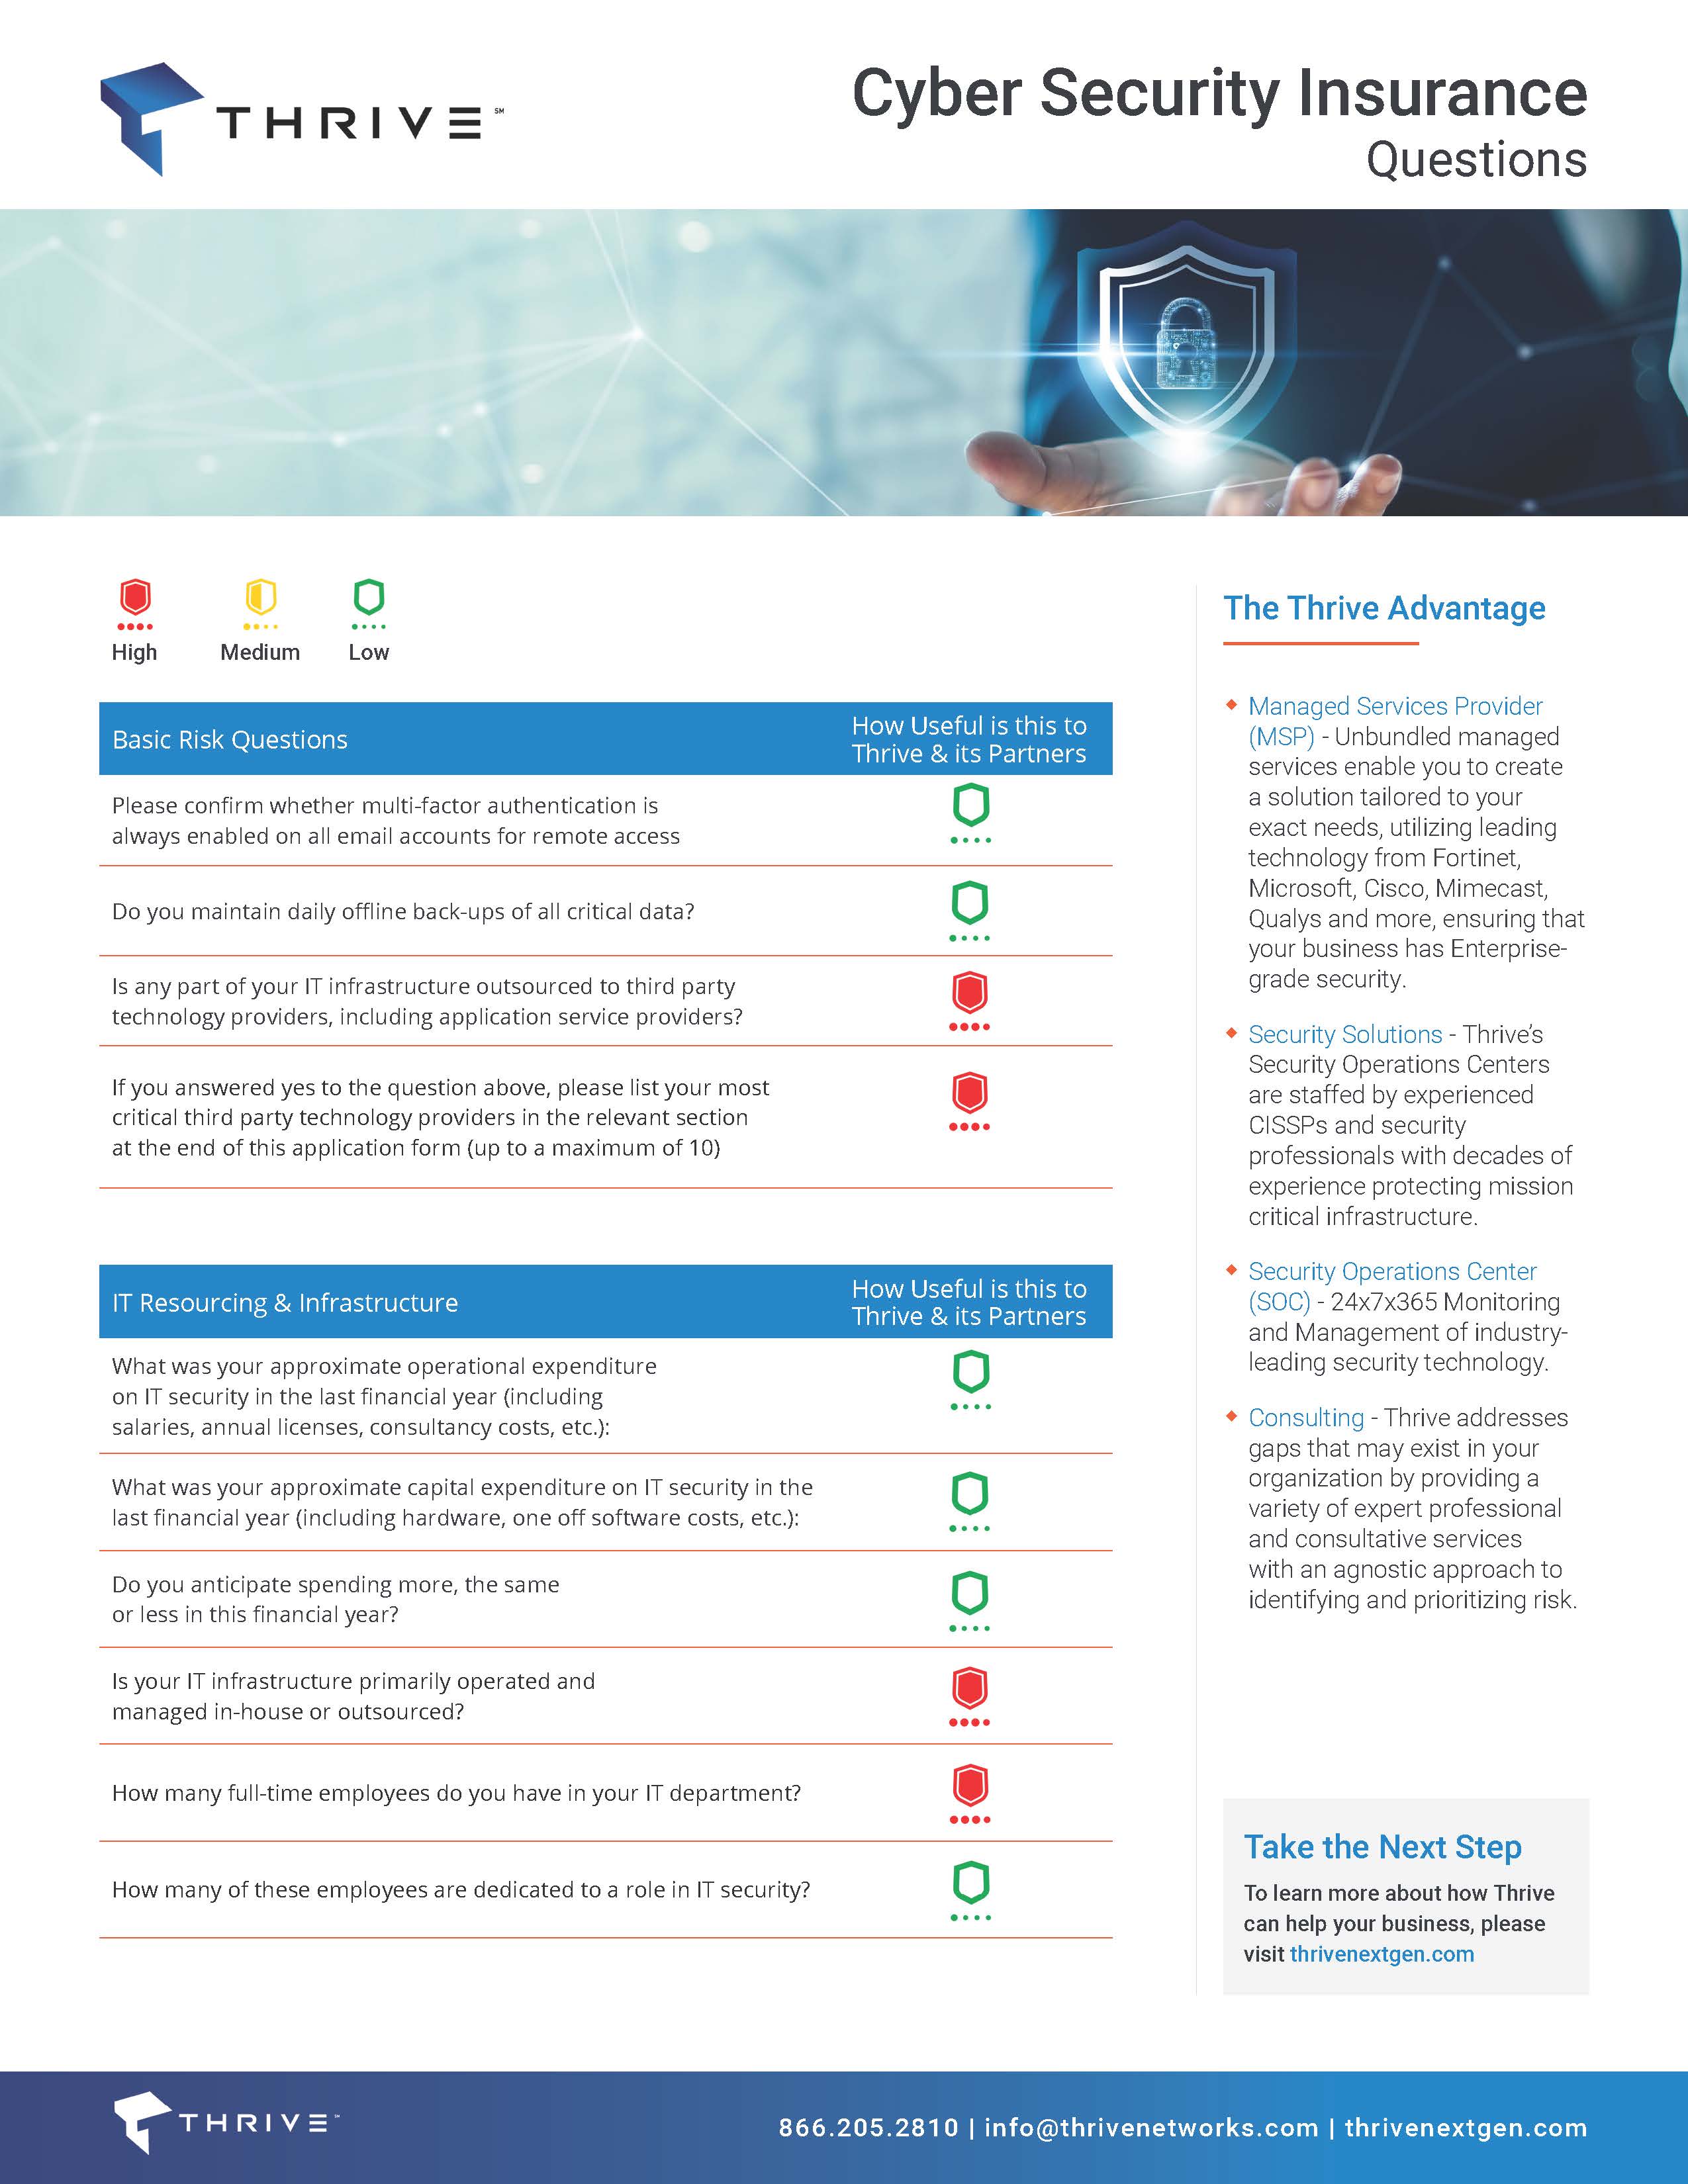 Thrive_Cyber Security Insurance Questions_One Pager 120621_Page_1